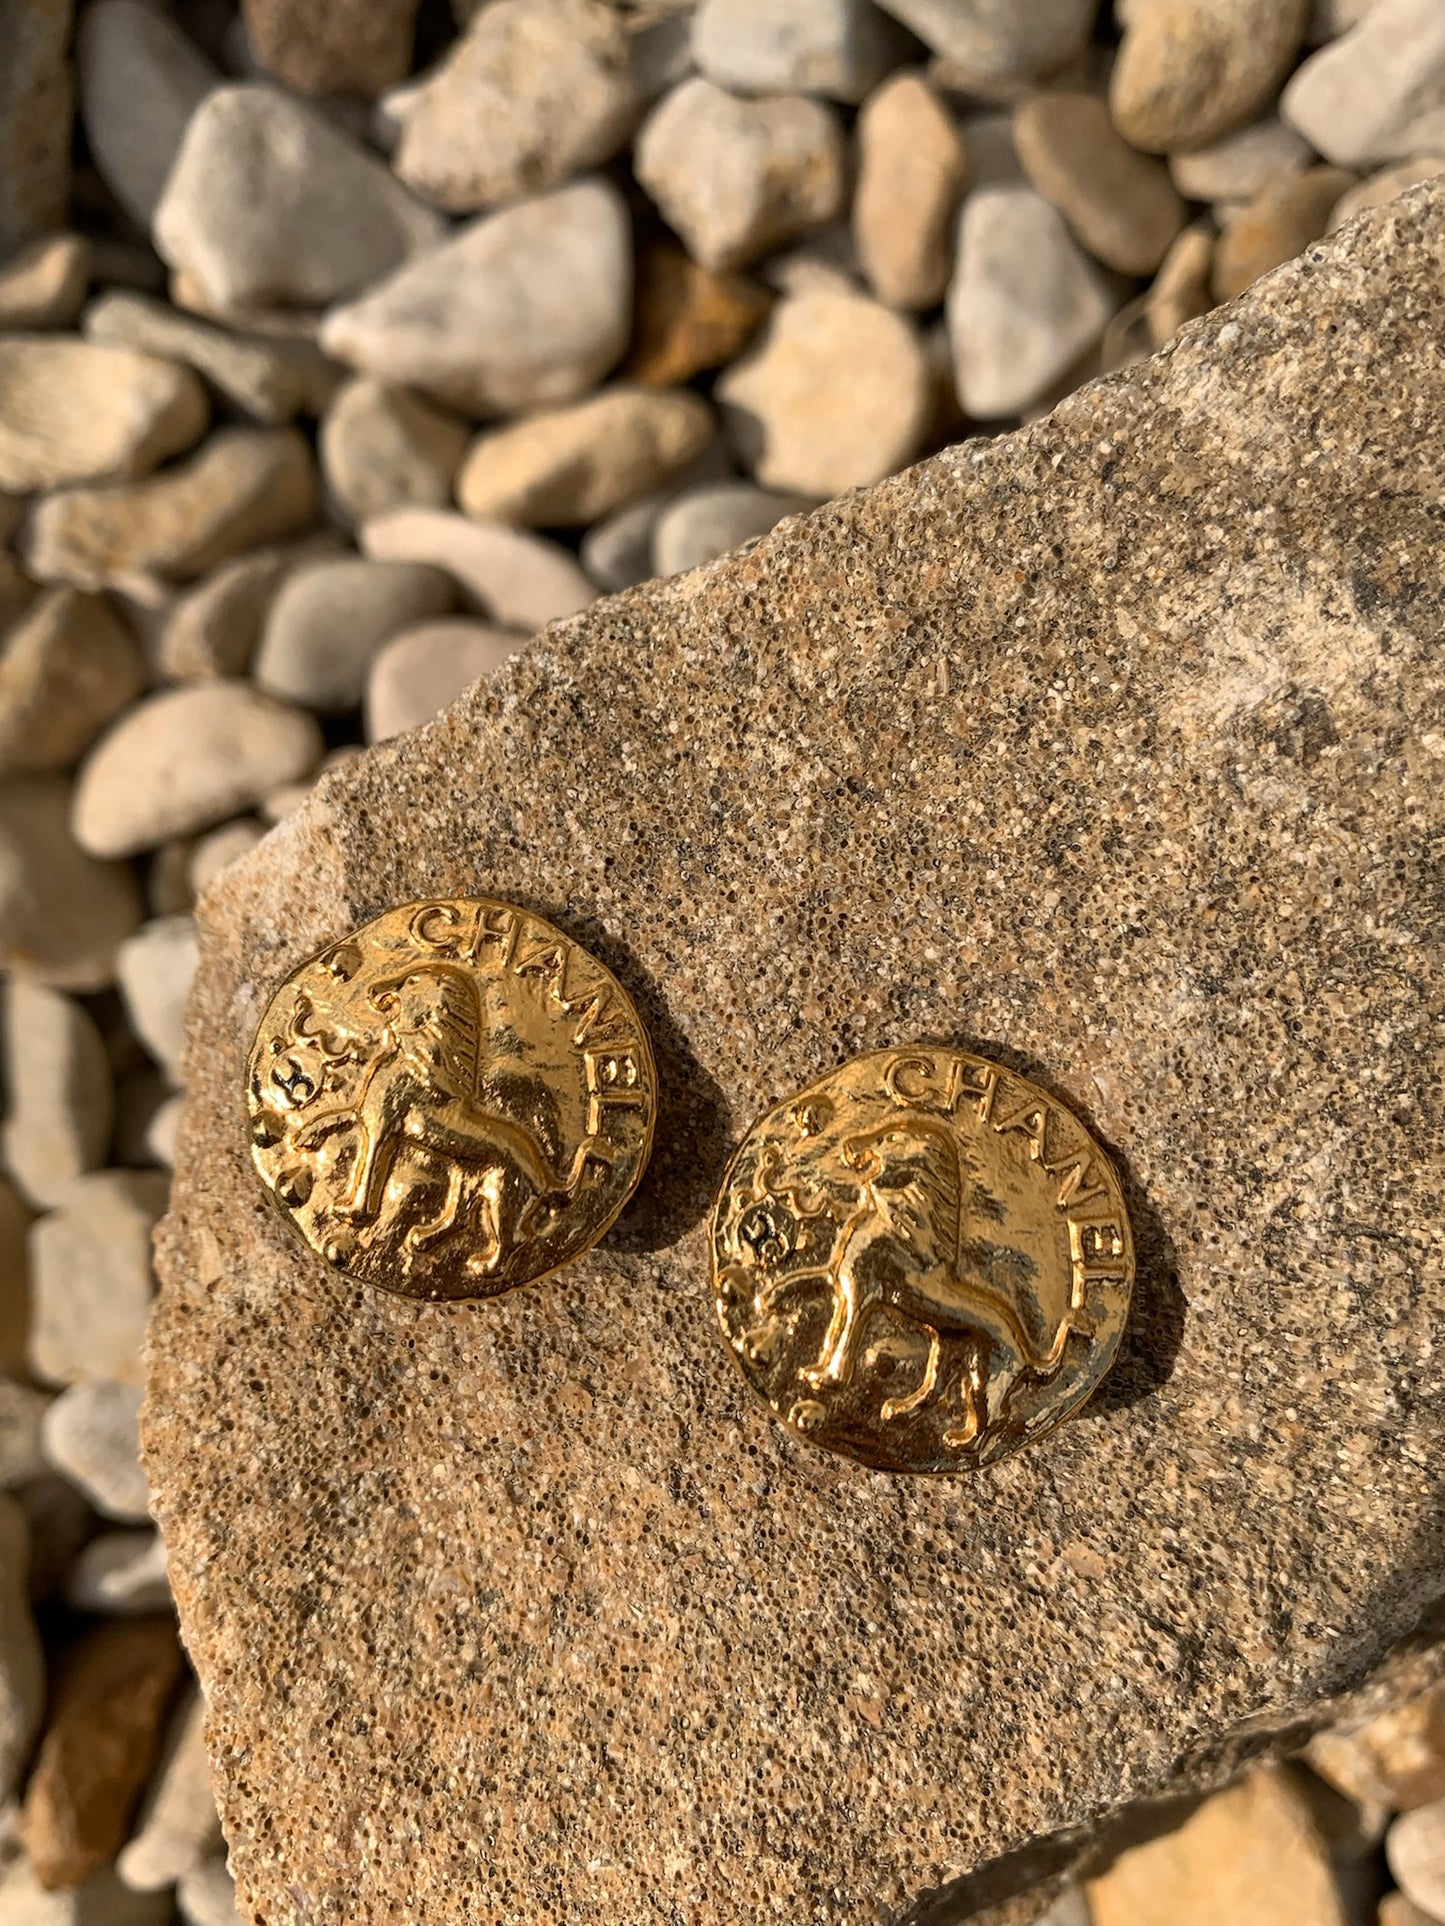 Chanel Lion Coco Mark Button Earrings Gold Plated Gold